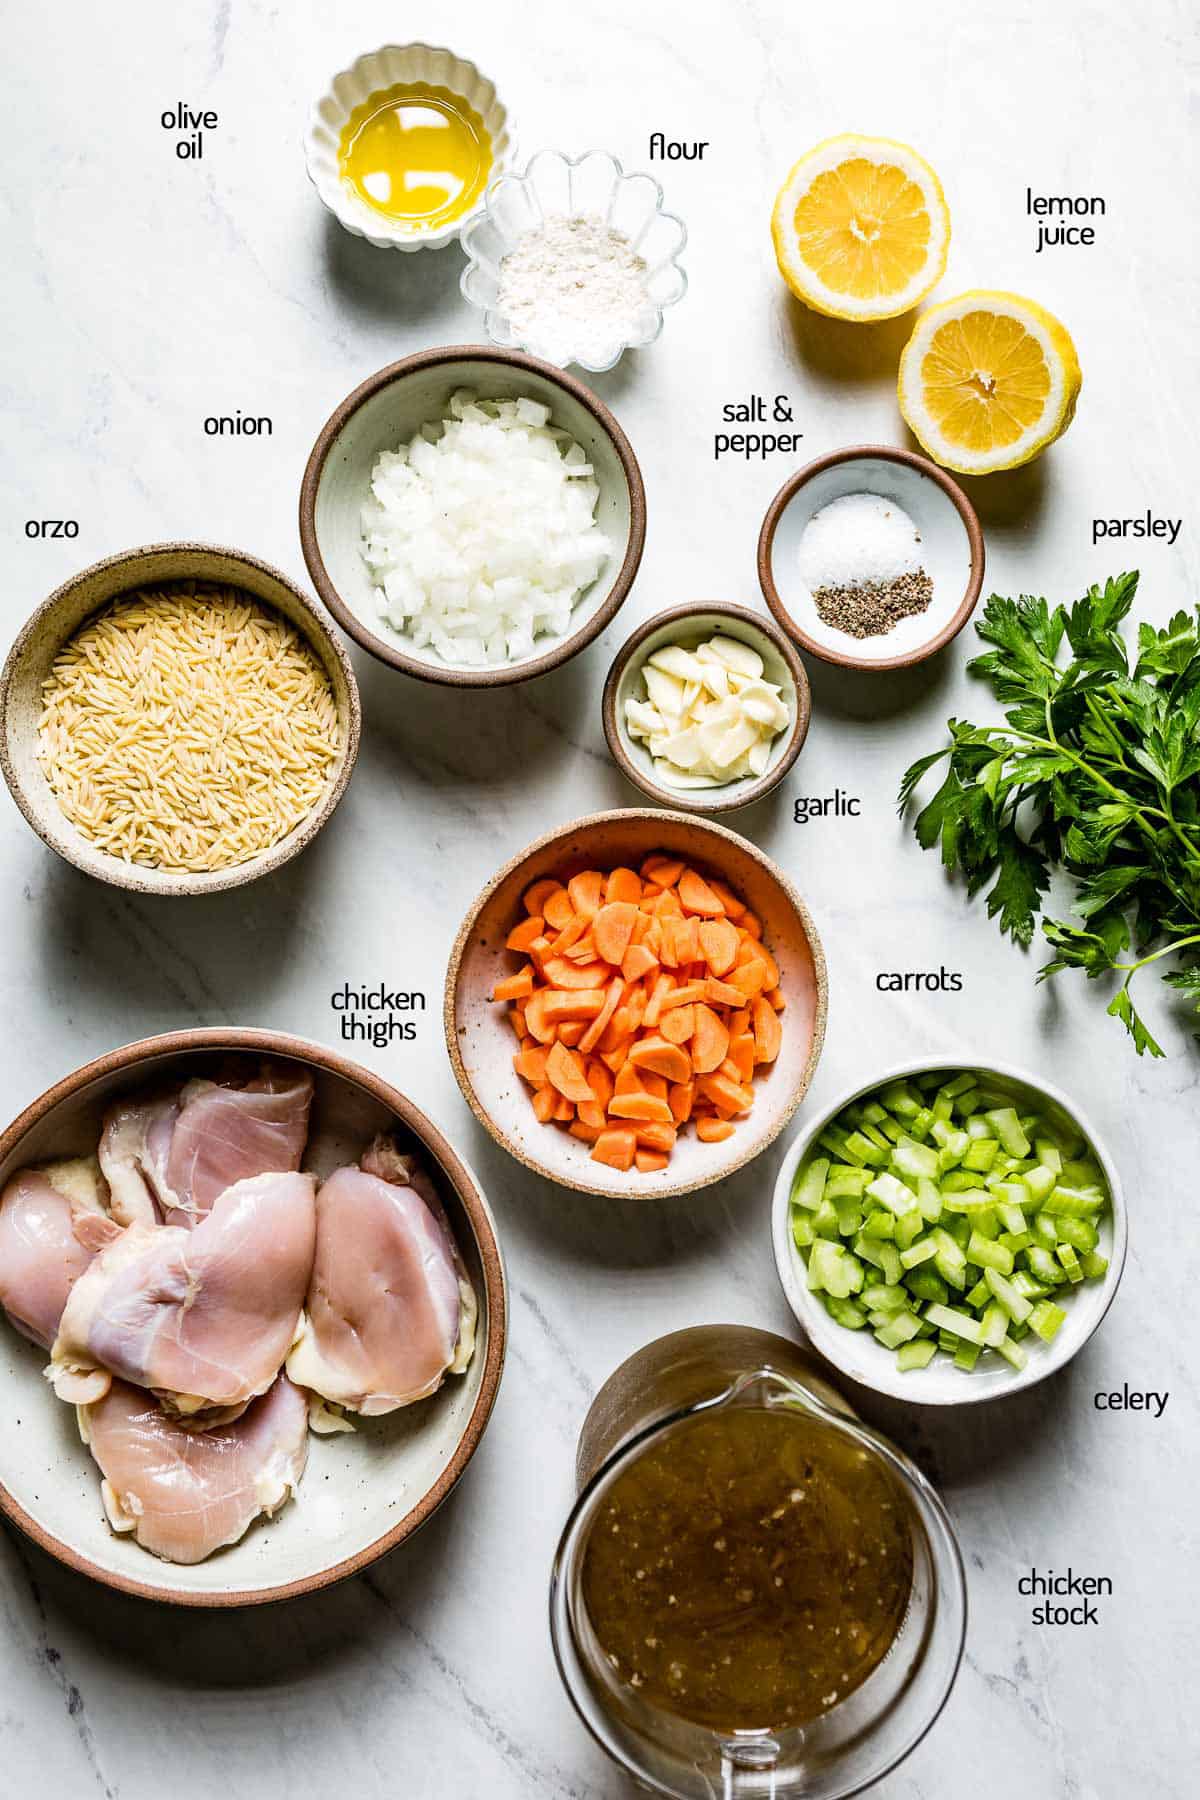 Ingredients for the recipe are laid out on a white backdrop